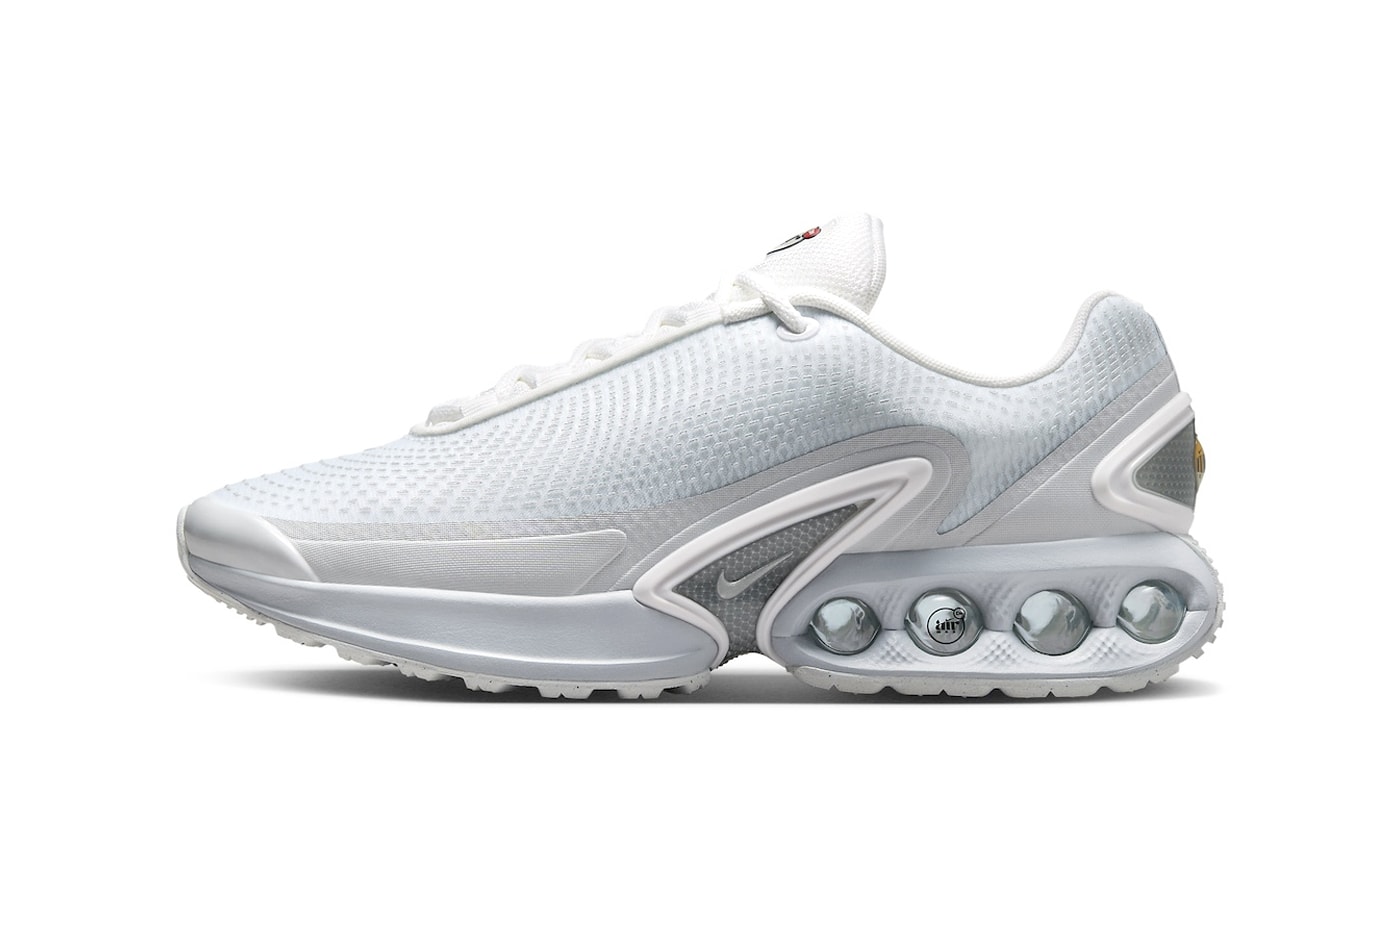 Nike Air Max DN Surfaces in a Clean White/Metallic Silver Colorway FJ3145-100 Release Info air max day swoosh